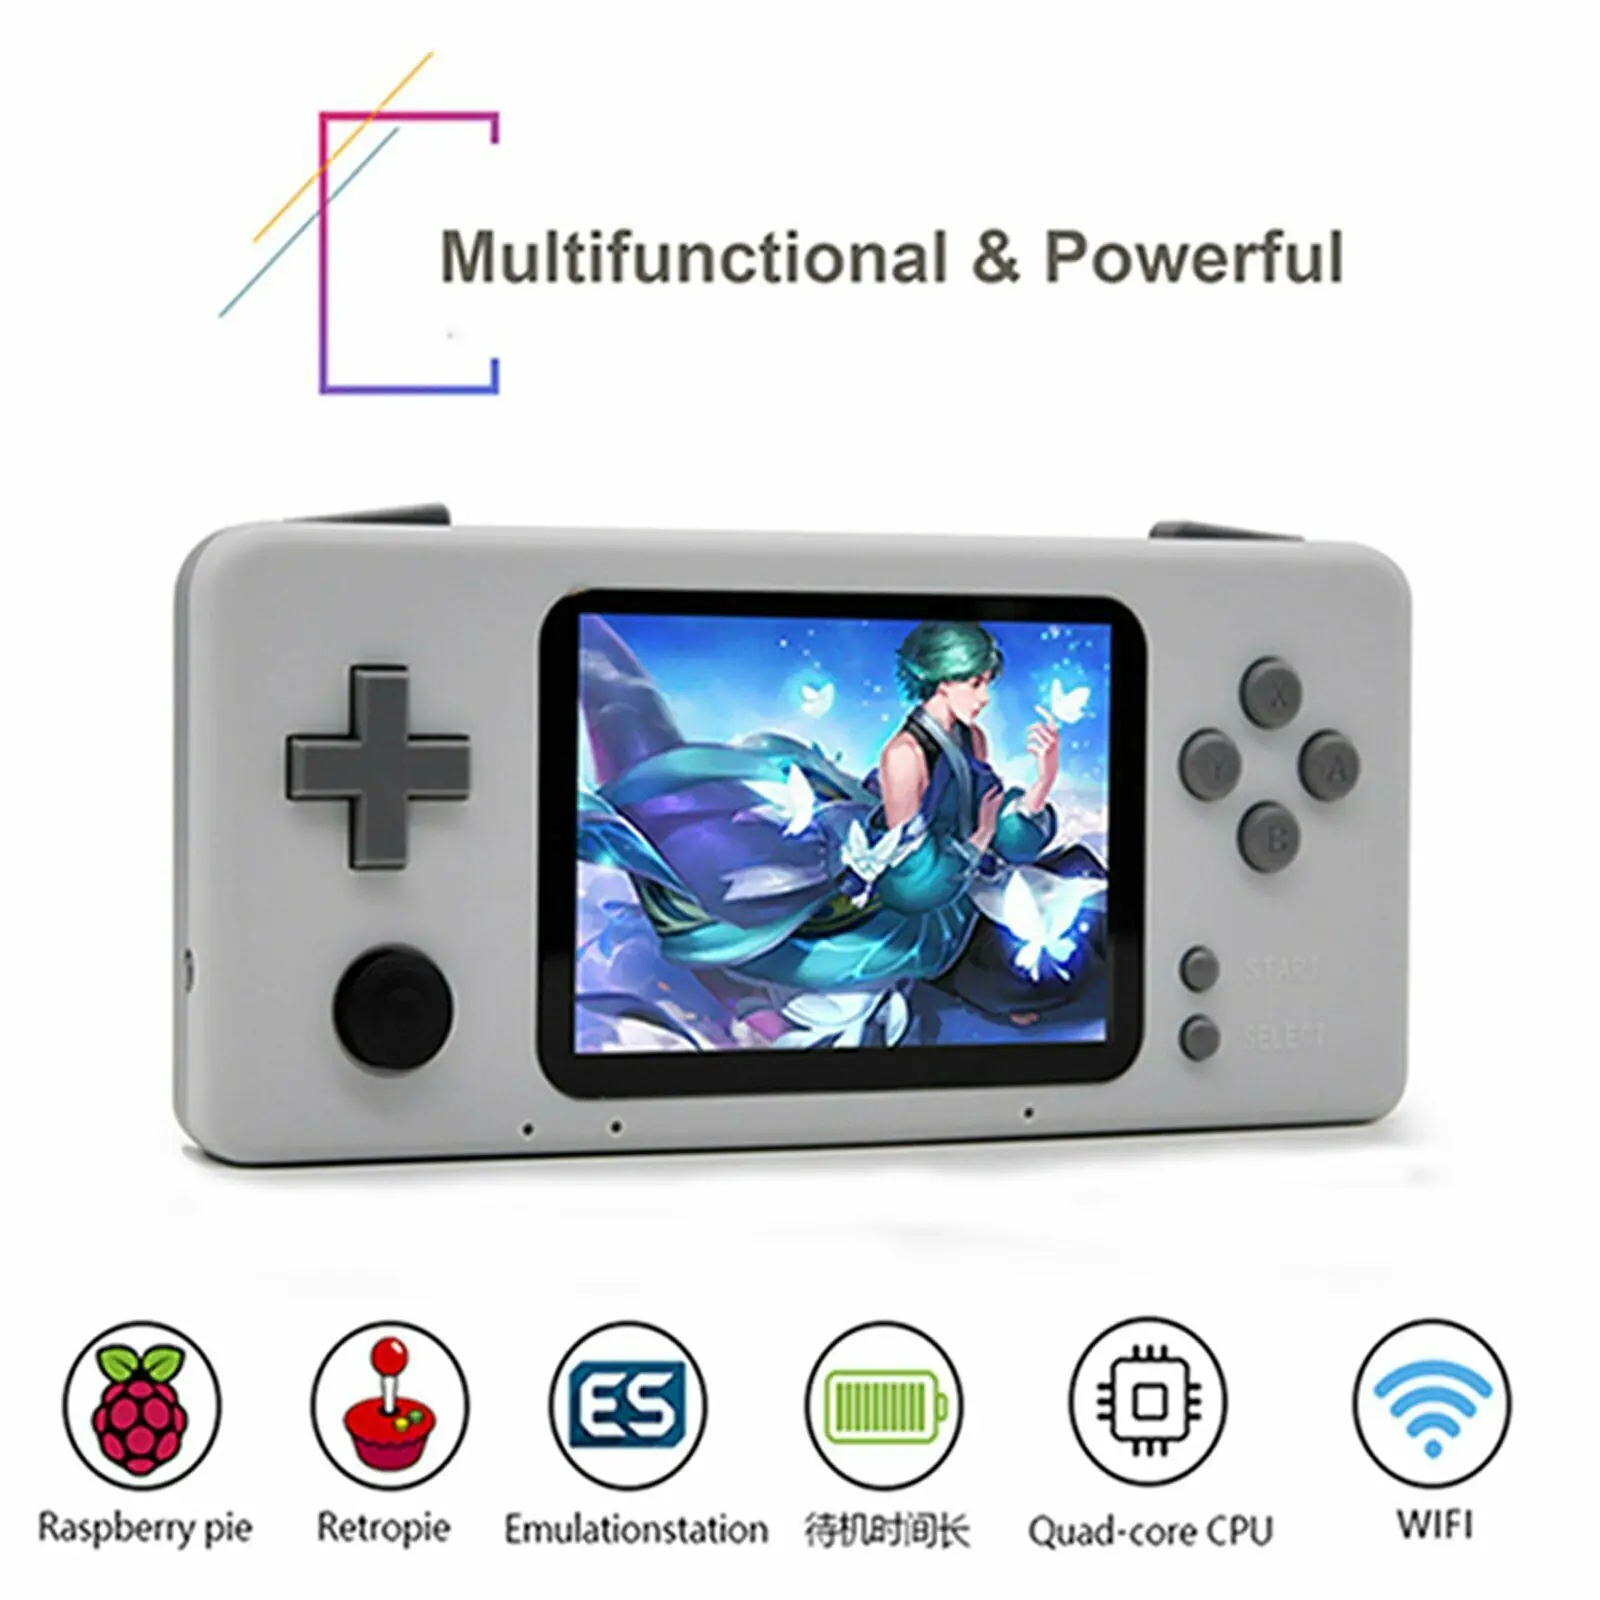 New 3.2 Inch IPS Rocker Handheld Game Console+15000 Video Games for Raspberry Pi CM3